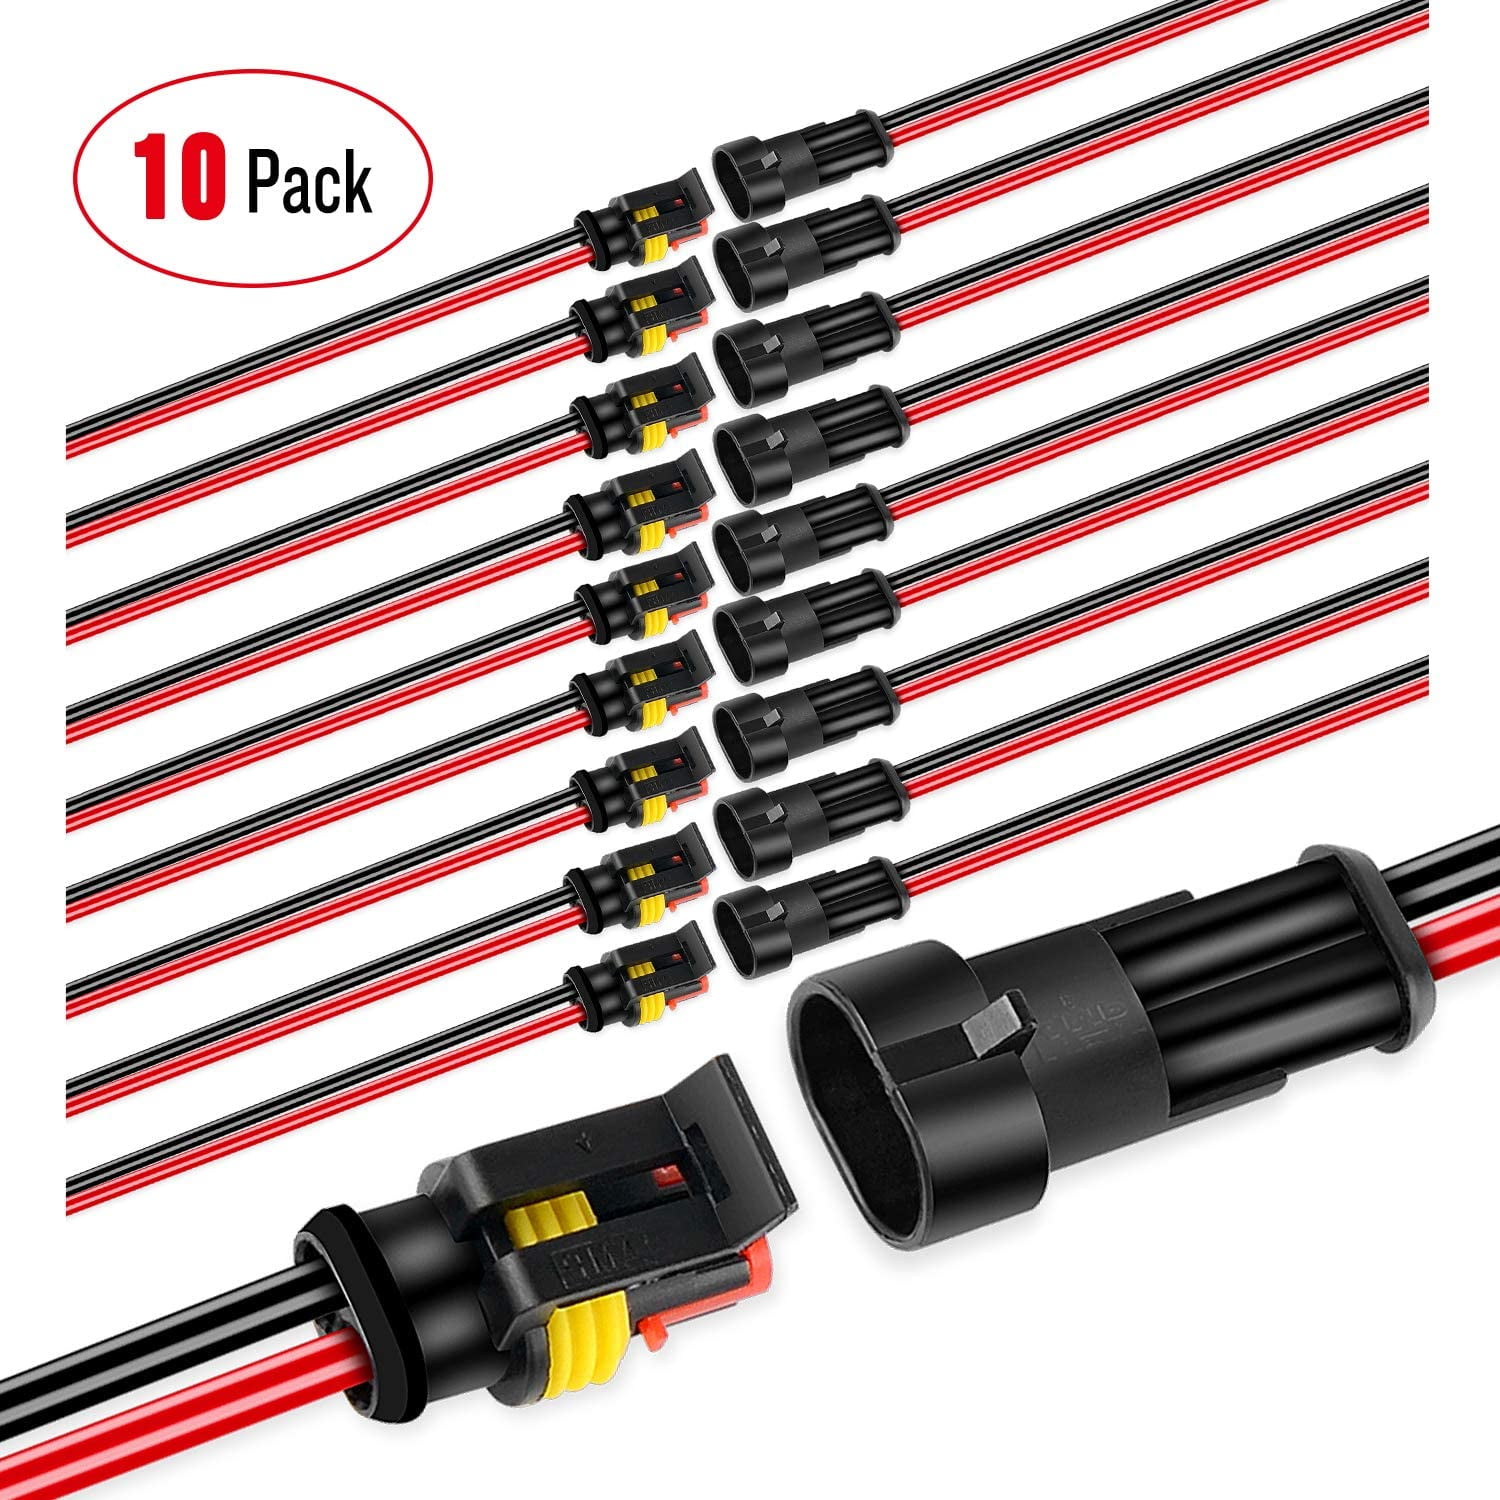 Nilight 6 AWG 20-Inch Battery Power Inverter Cables with Terminals,Red +  Black Tinned Copper Battery Inverter Cables for Motorcycle, Automotive